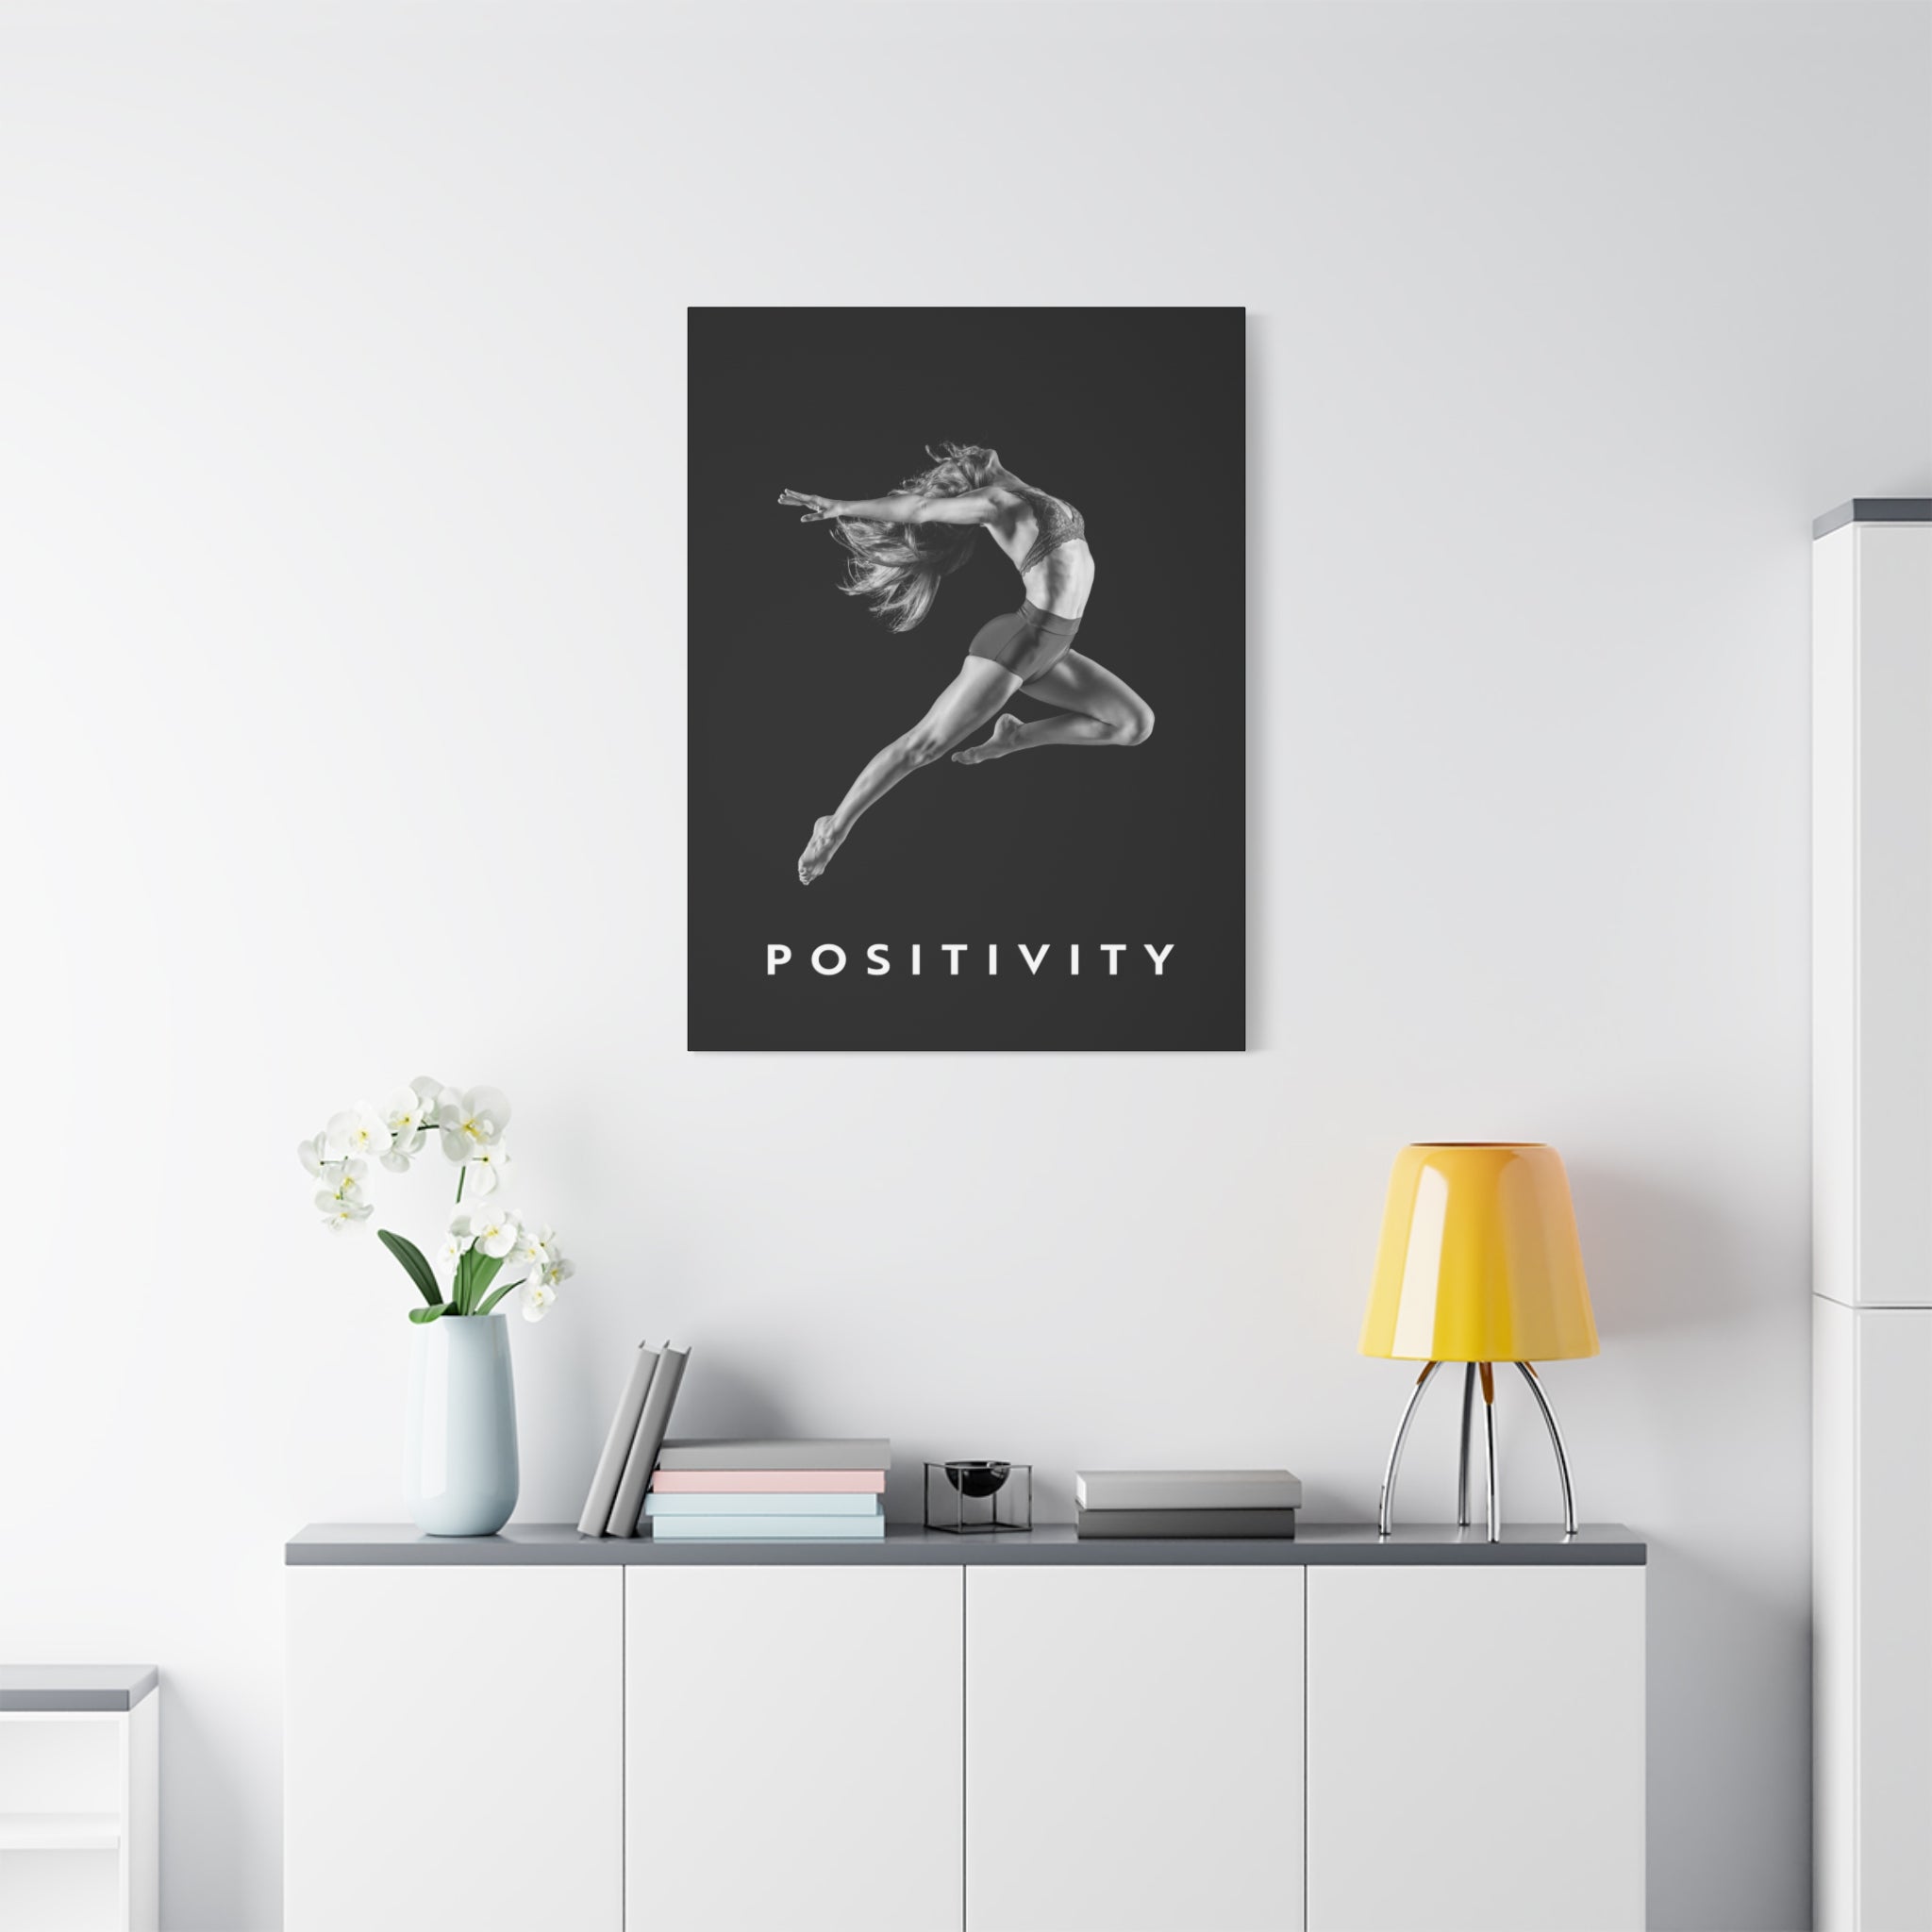 Positivity - Airborne Black And White - Wall Art additional image 3